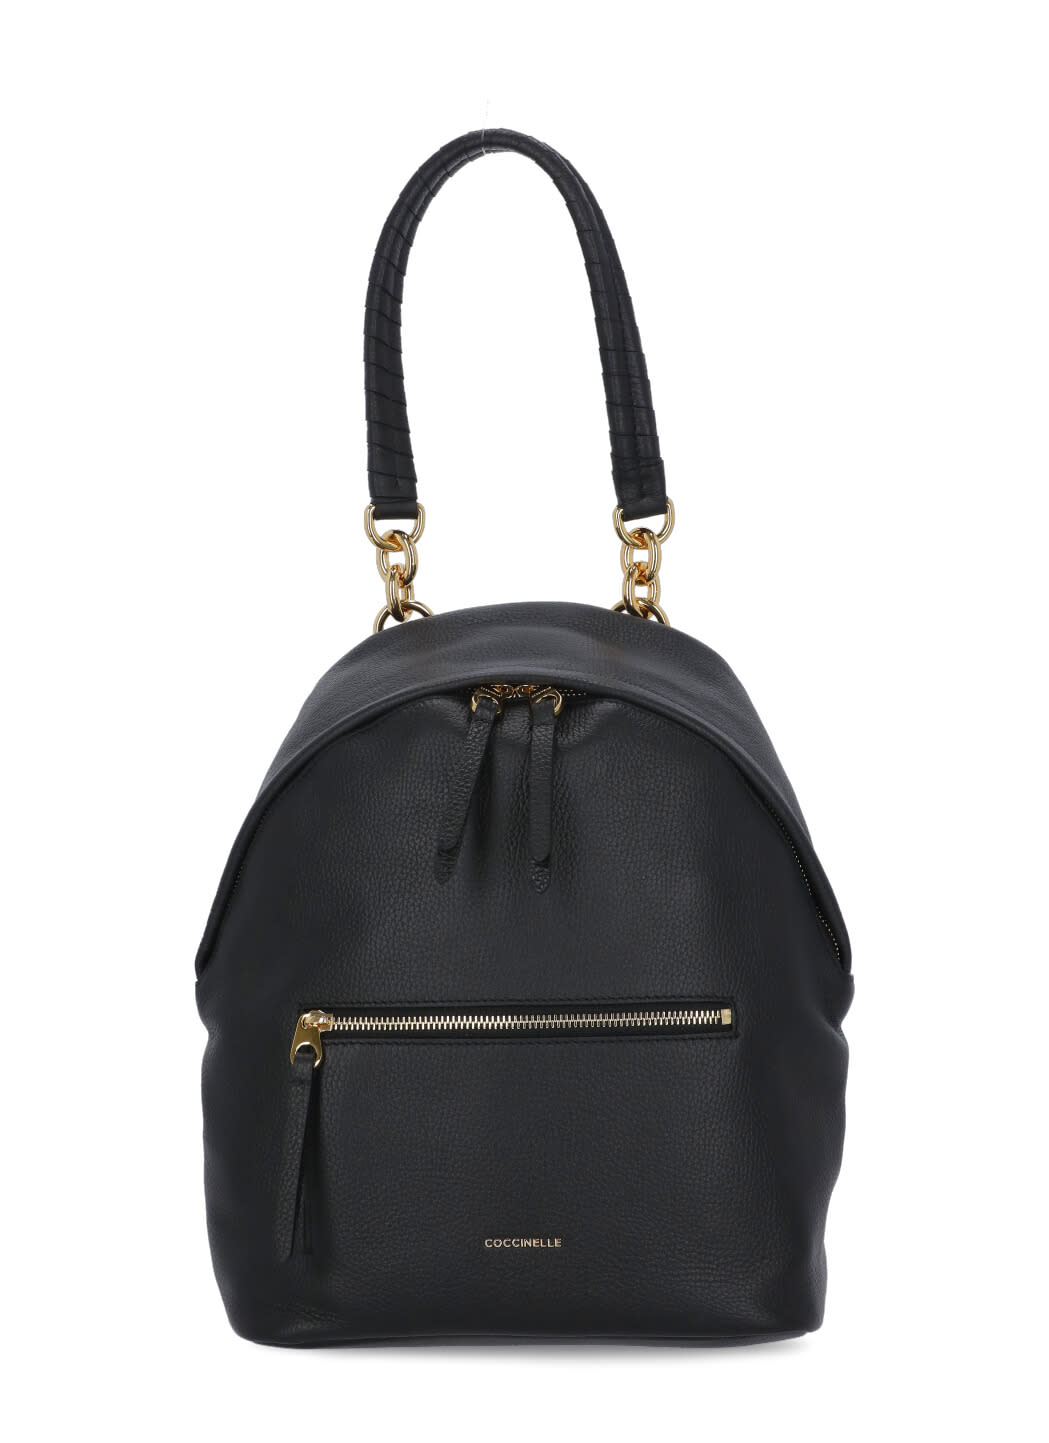 Coccinelle Maelody Backpack